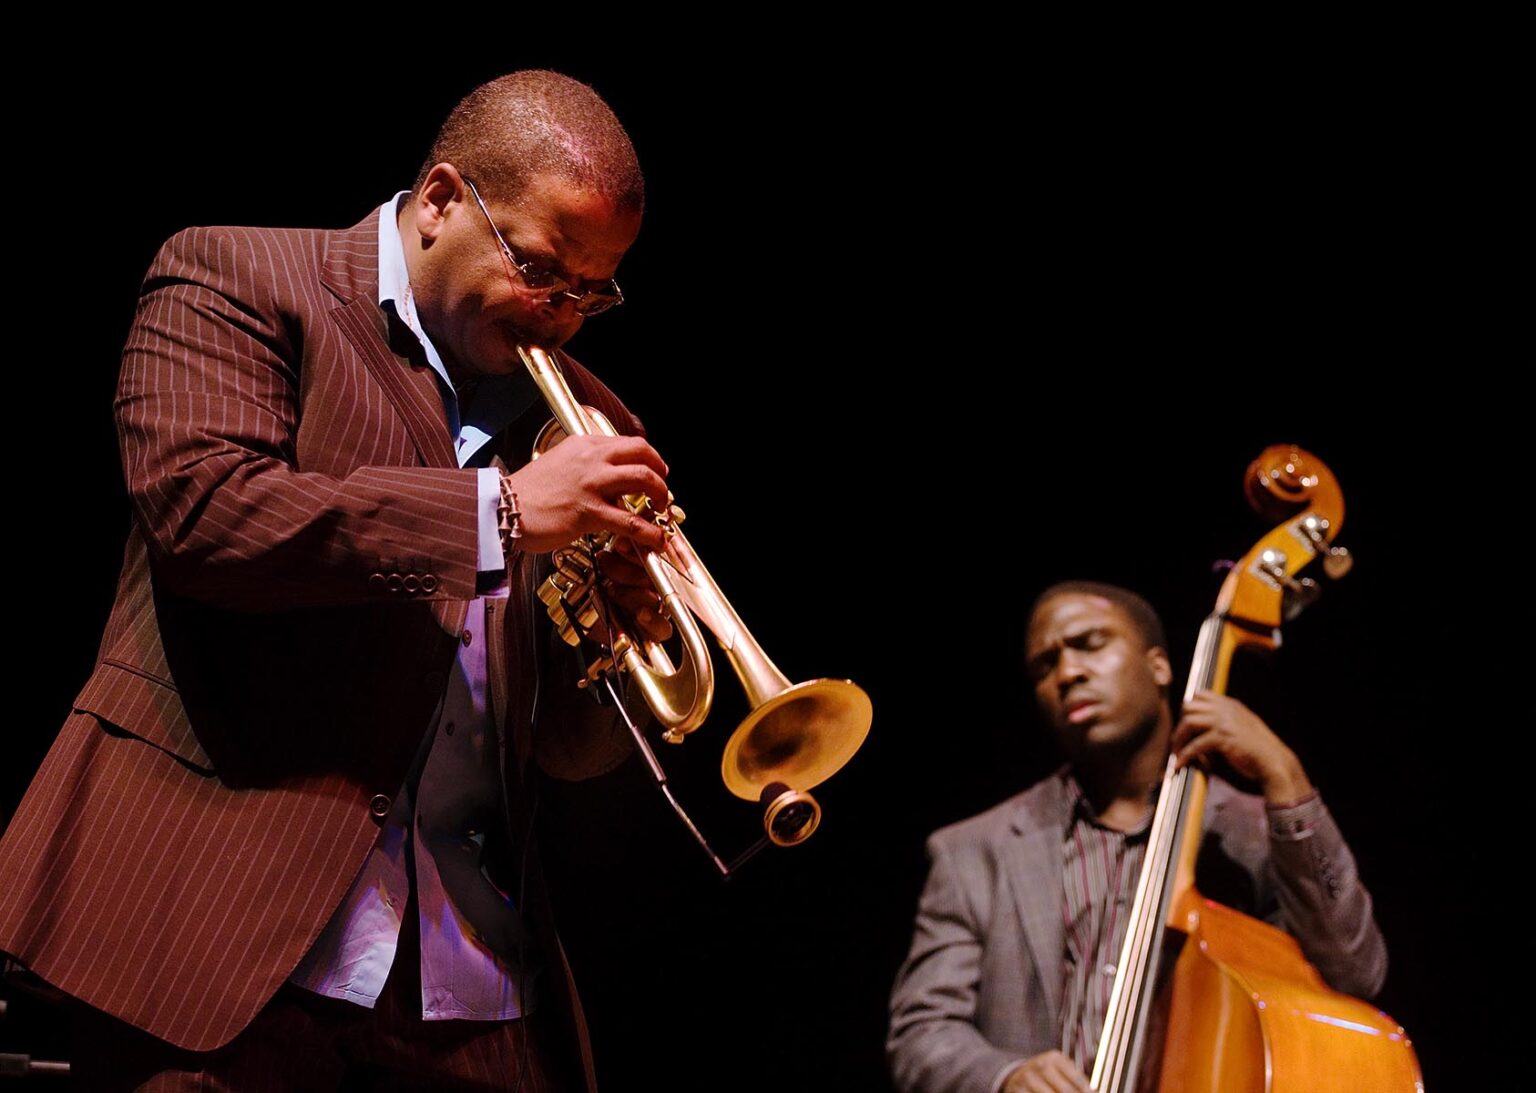 TERENCE BLANCHARD on TRUMPET performs with DERRICK HODGE at the NEW GENERATION JAZZ FESTIVAL - MONTEREY, CALIFORNIA